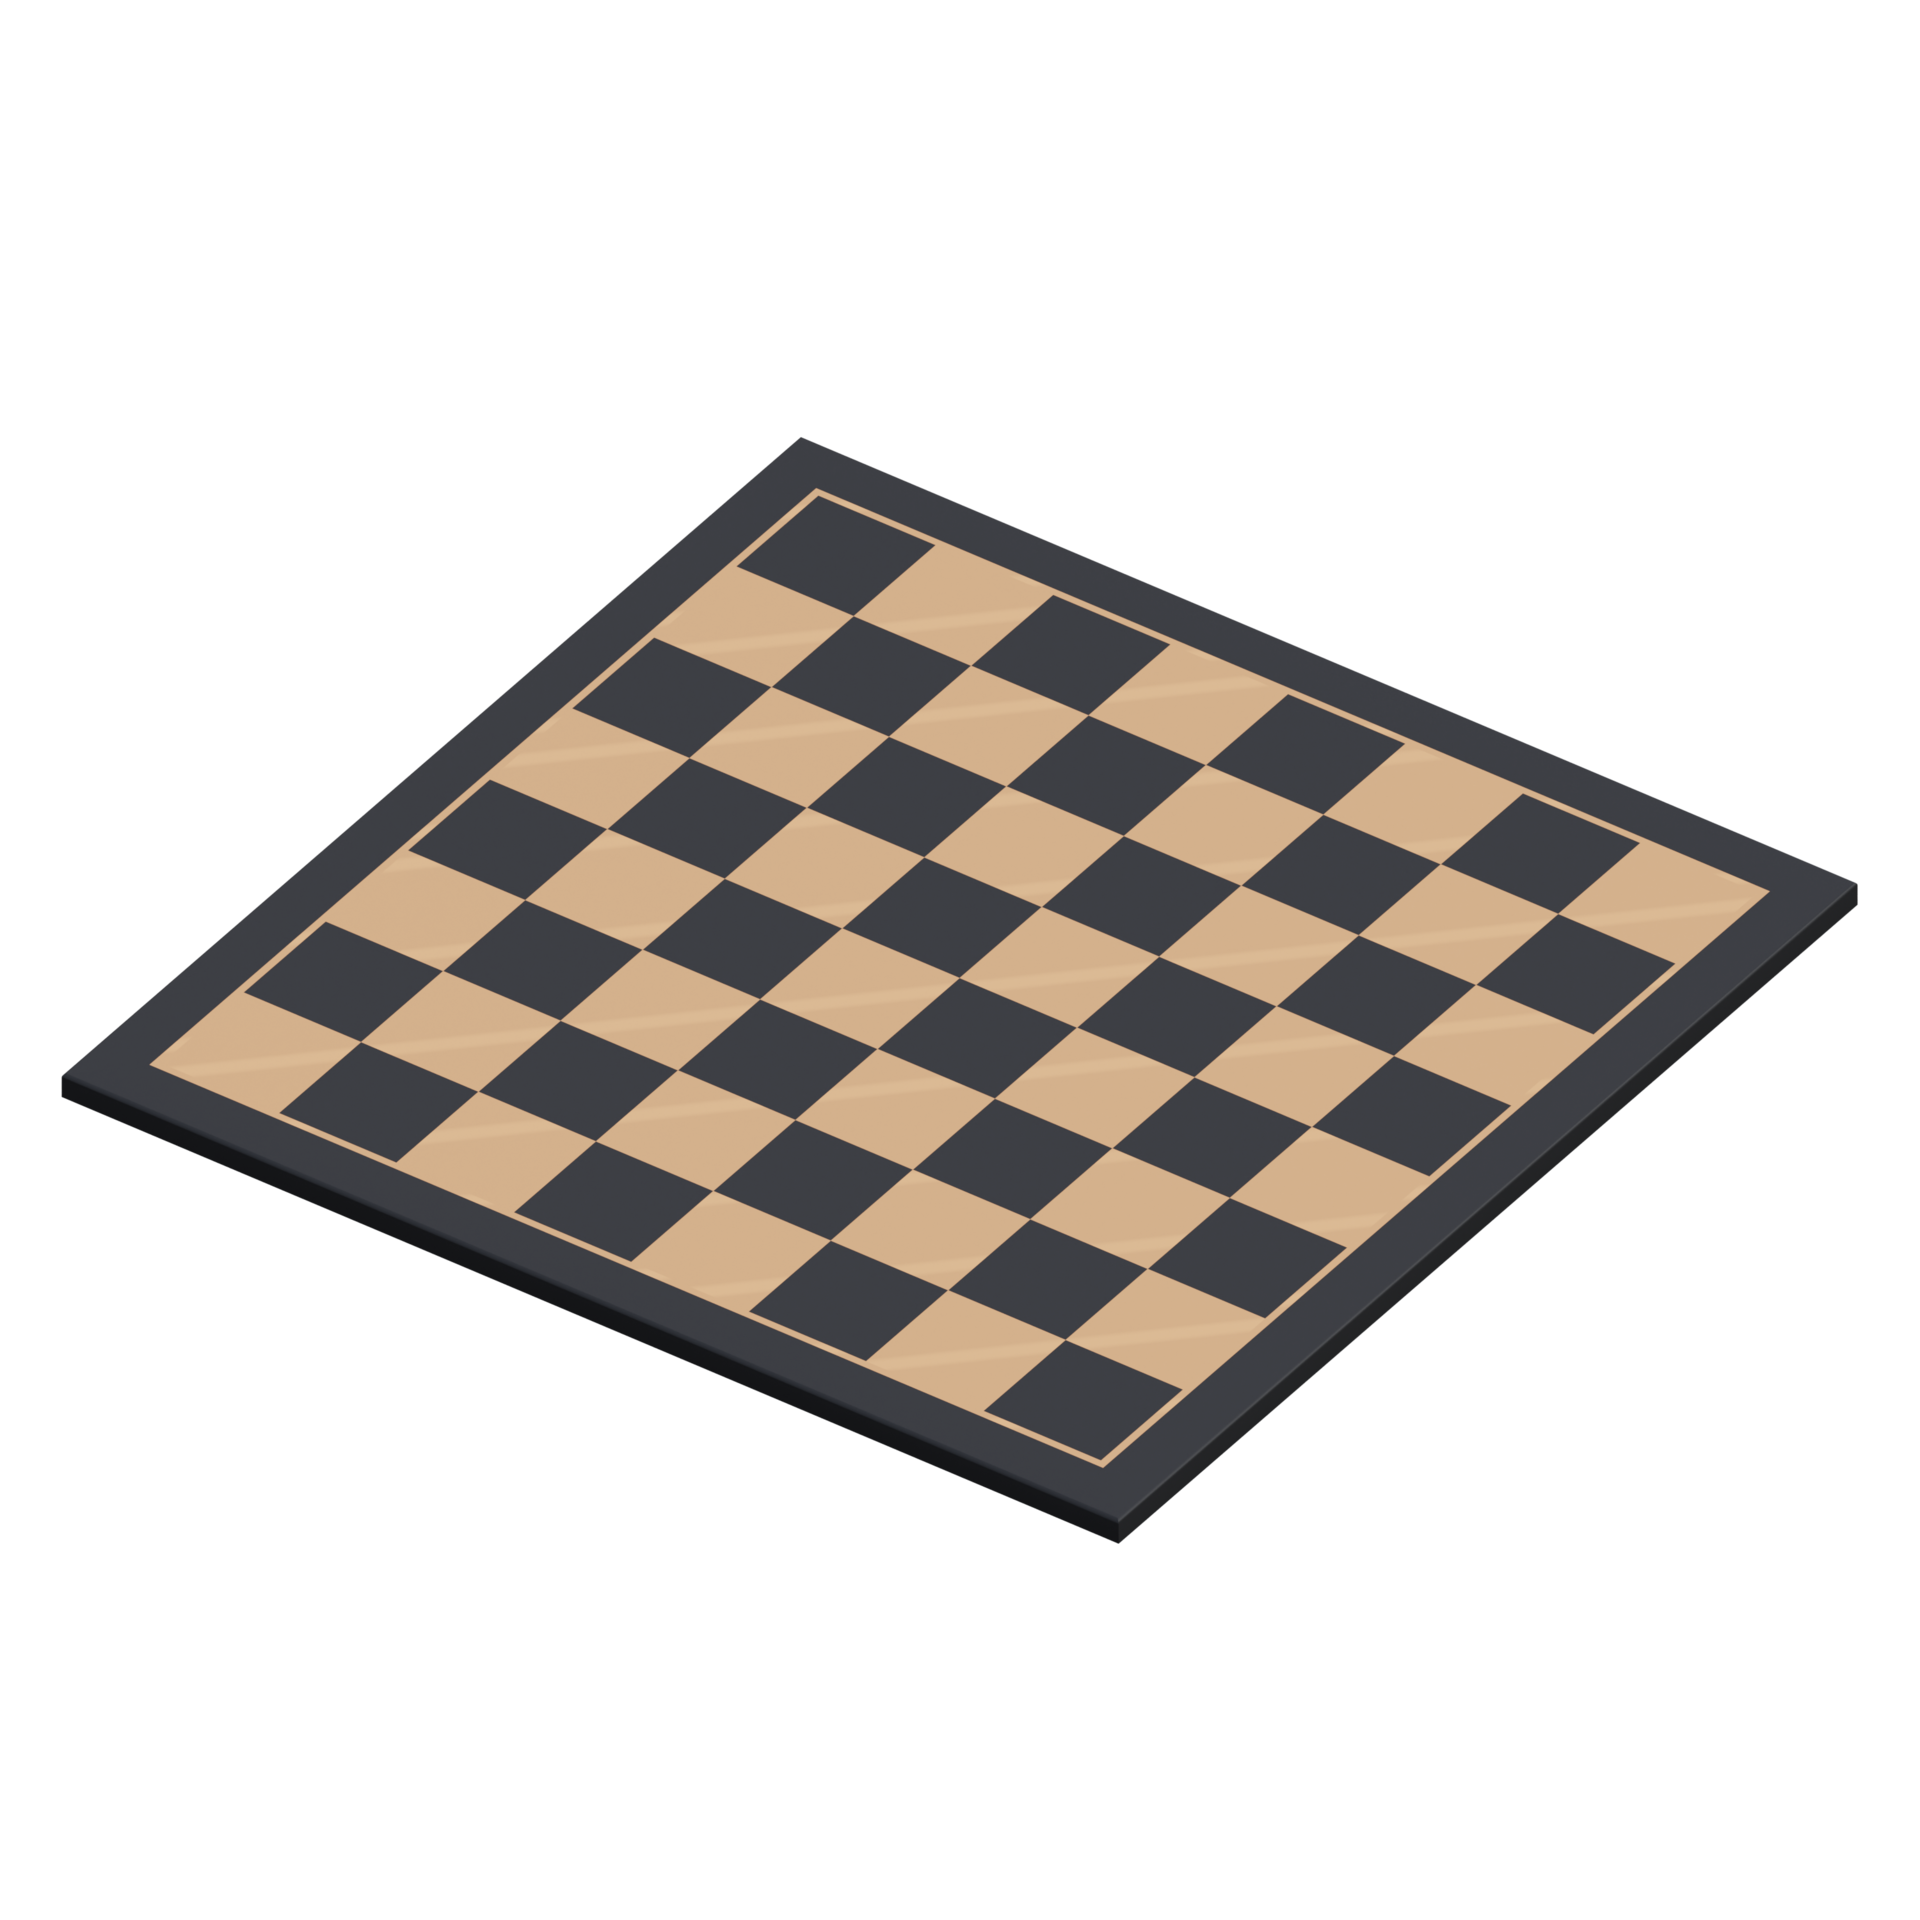 Chess Games png download - 1200*1220 - Free Transparent Chess png